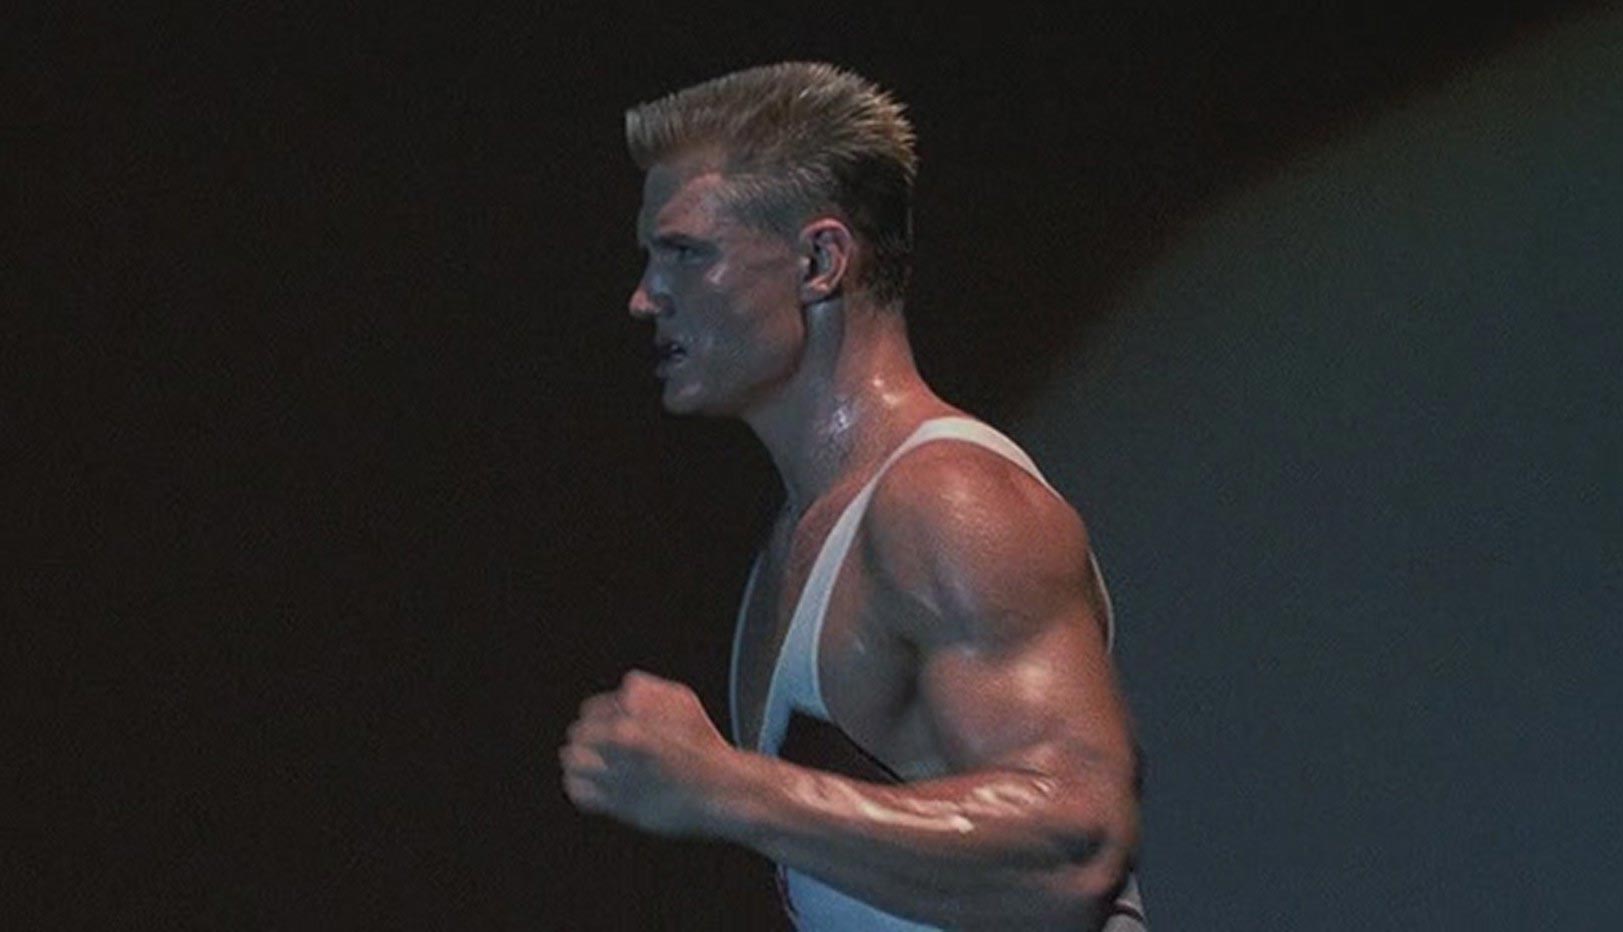 Ivan Drago screenshots, image and picture